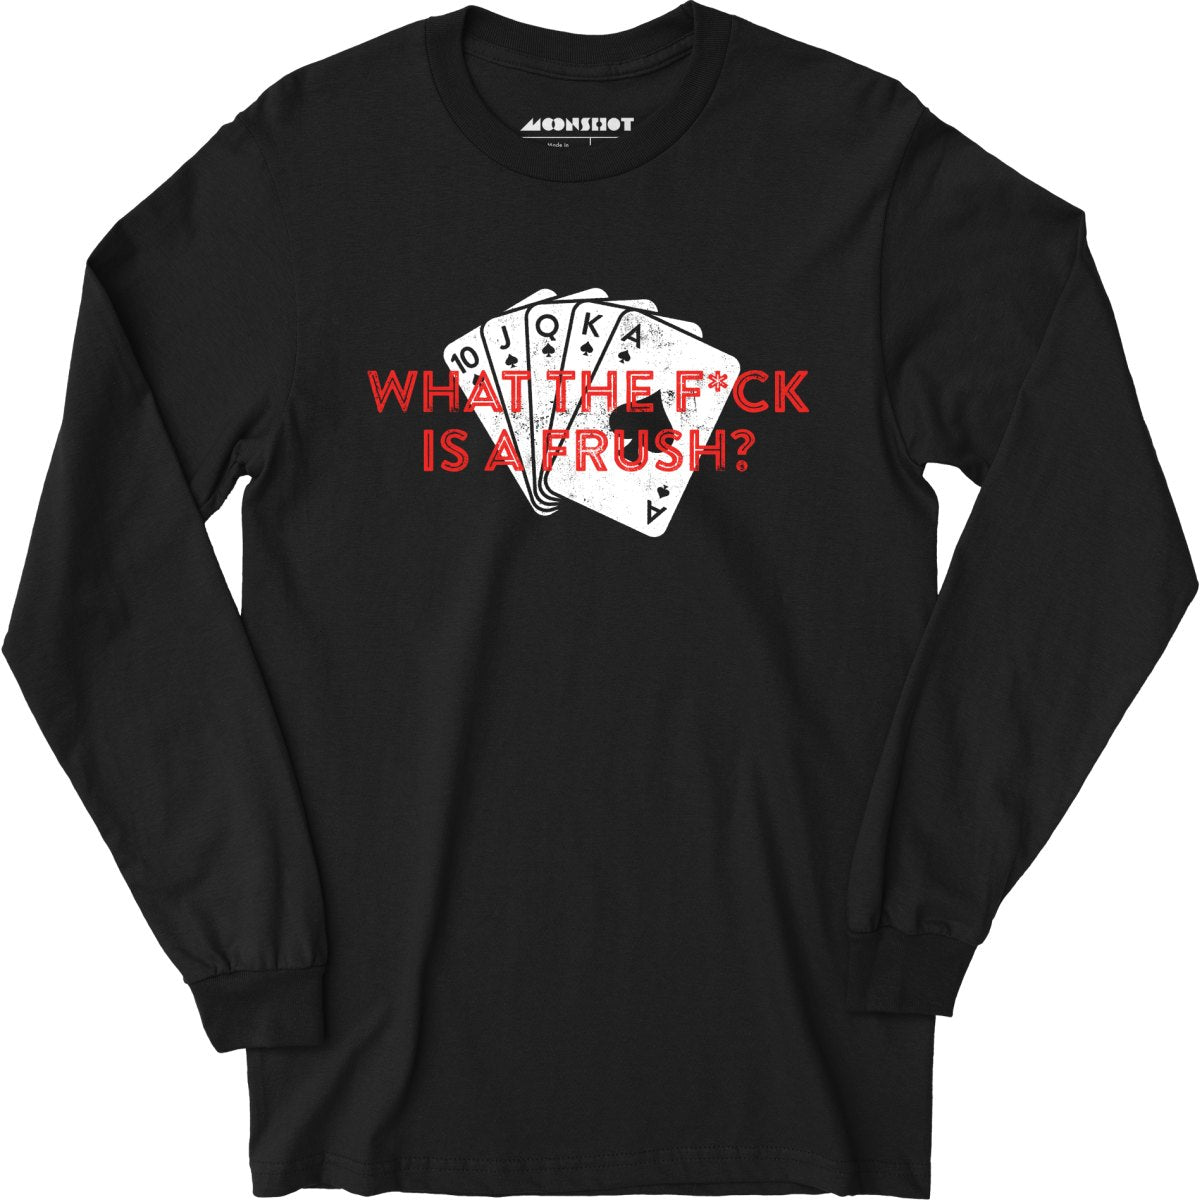 What The F*ck is a Frush? - Long Sleeve T-Shirt